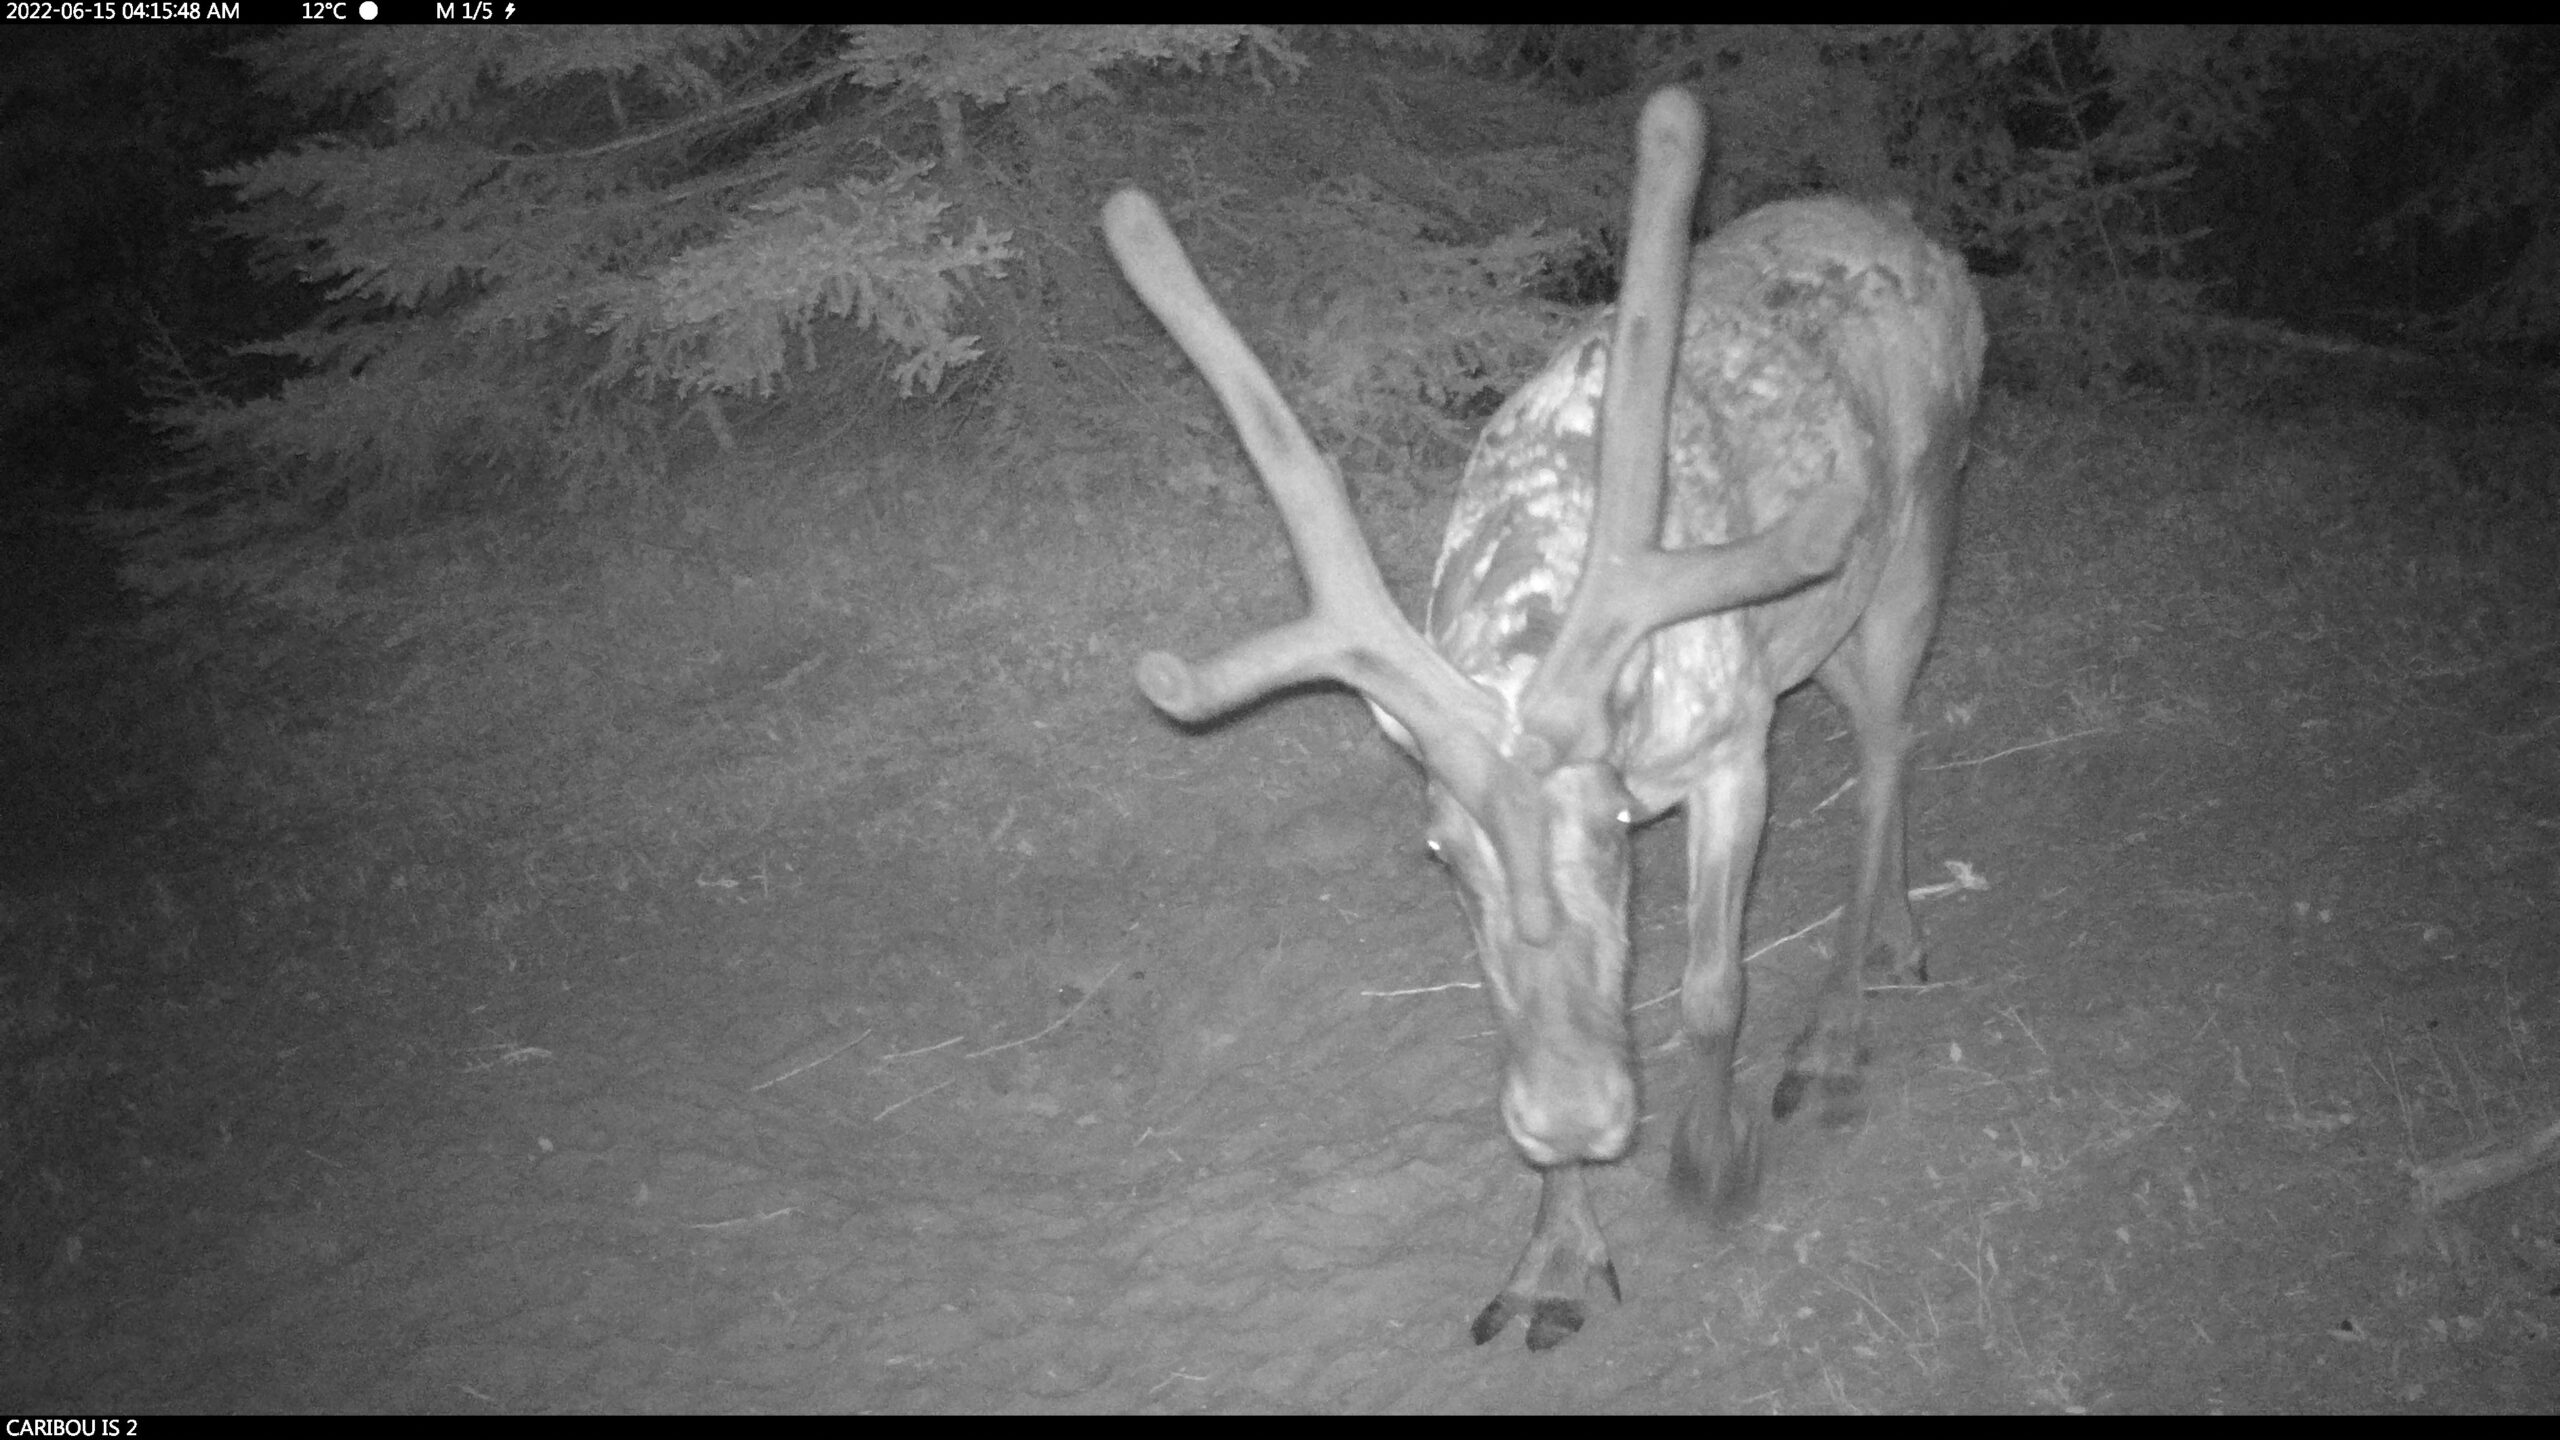 A caribou, shown in night vision on a beach with a tree behind it, walks towards the camera